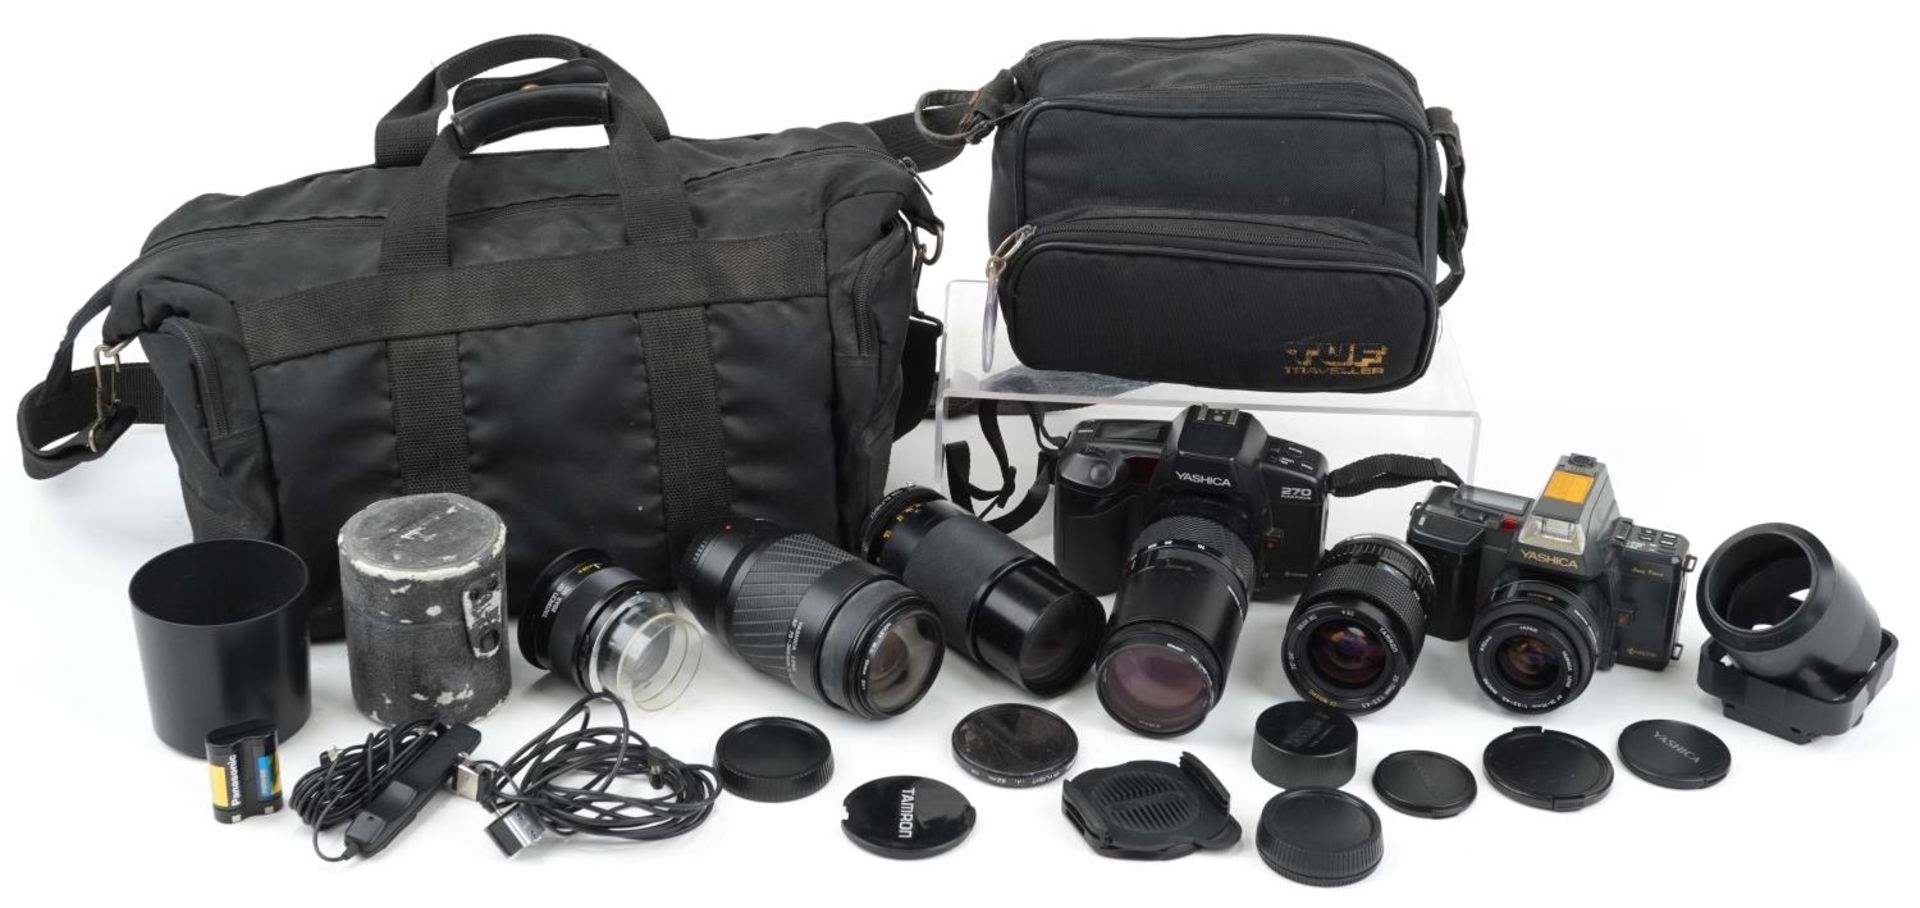 Vintage and later cameras and accessories including Yashica camera bodies and Tamron lenses : For